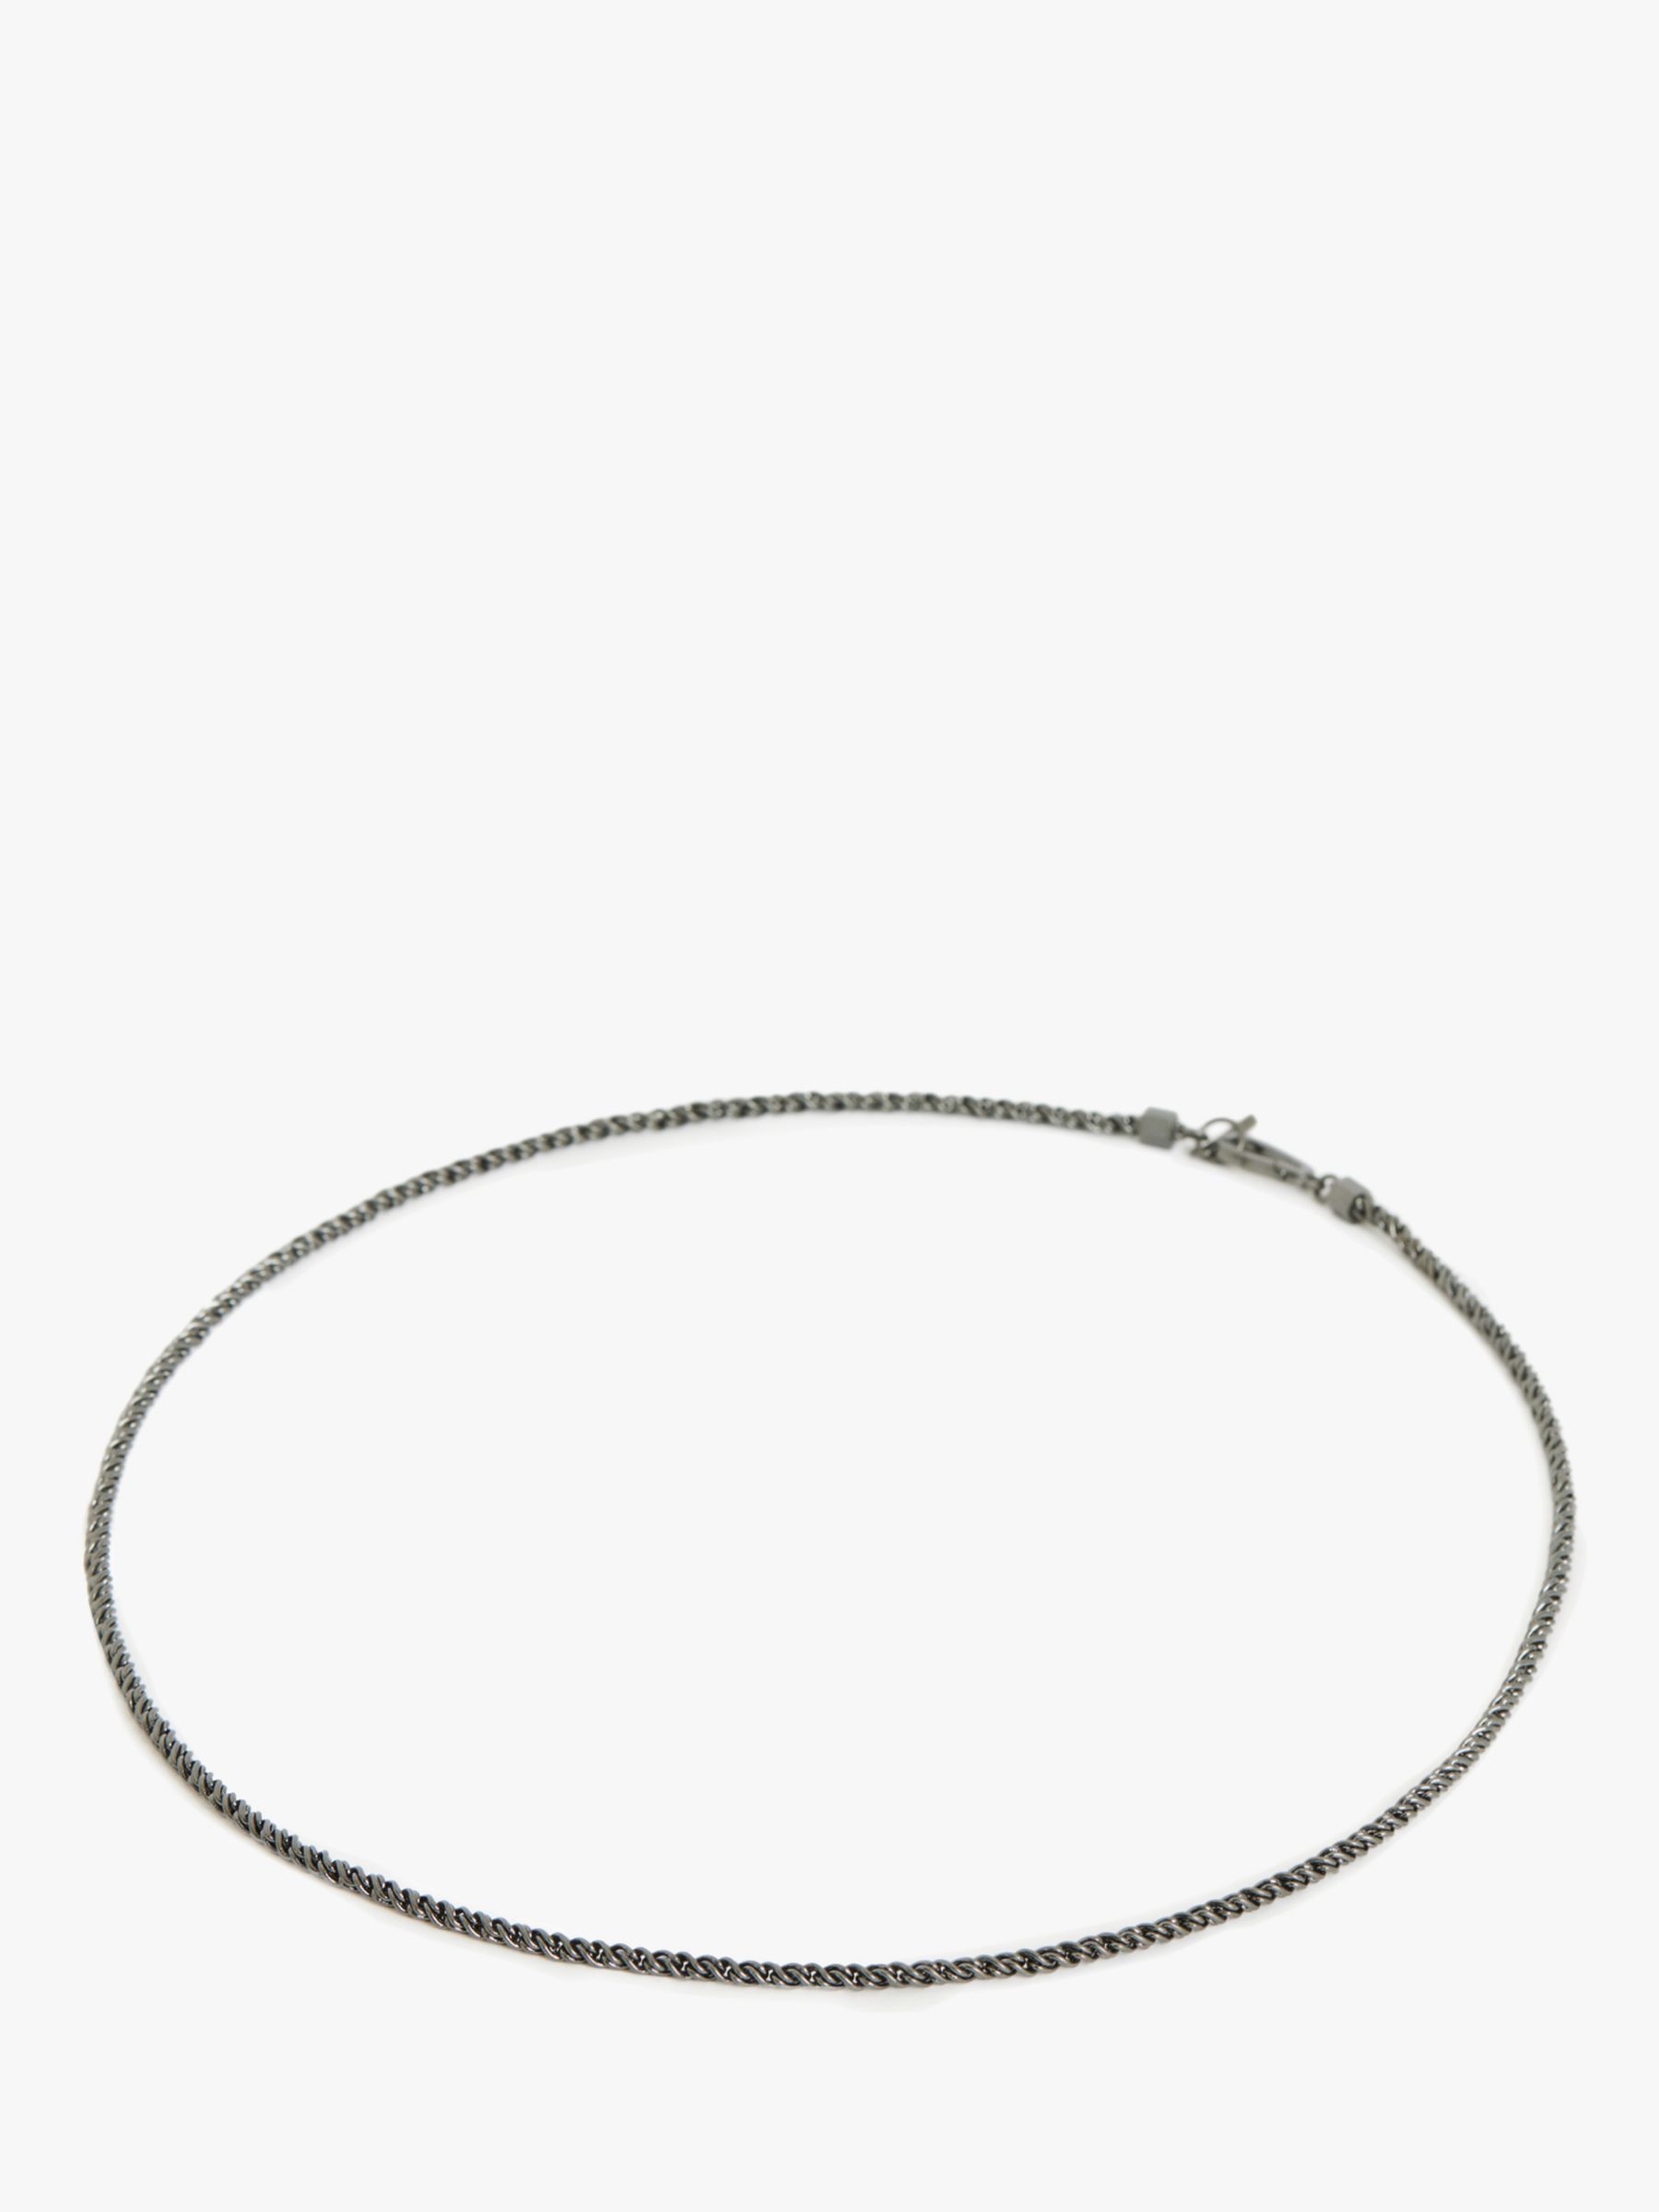 Buy AllSaints Twisted Chain Necklace, Silver Online at johnlewis.com